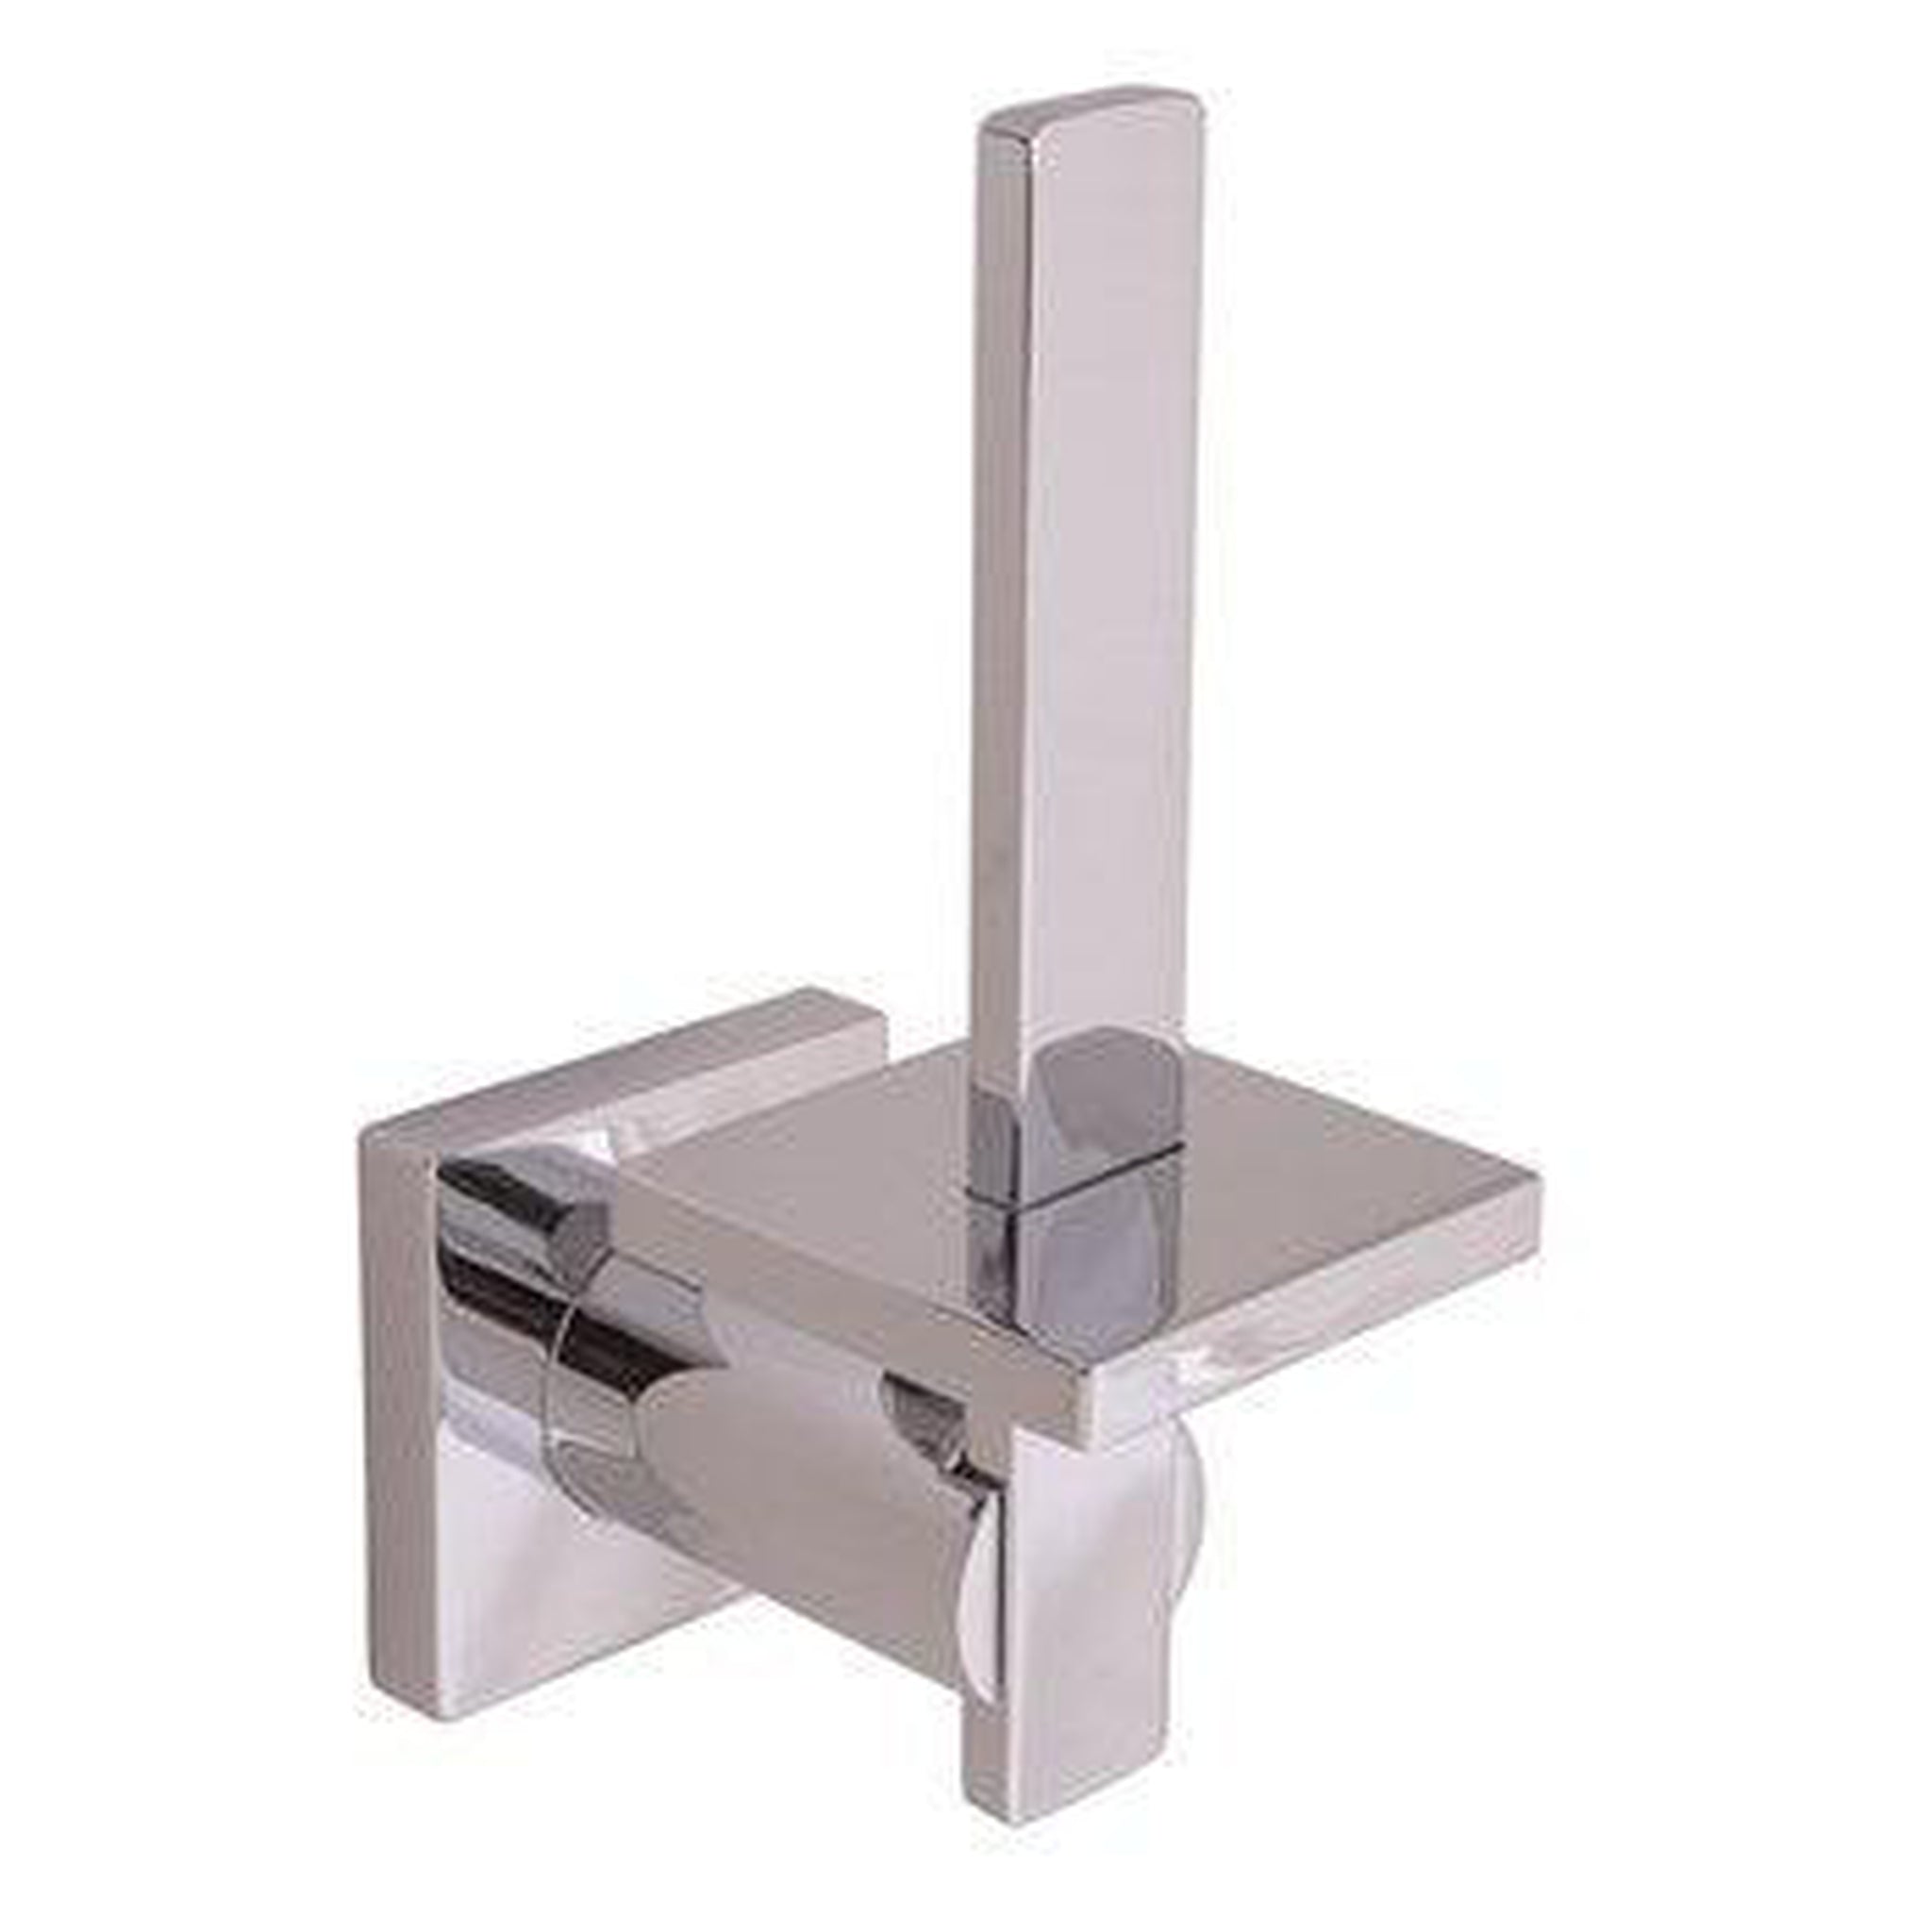 Wall-Mount Vertical Toilet Paper Holder in Polished Chrome